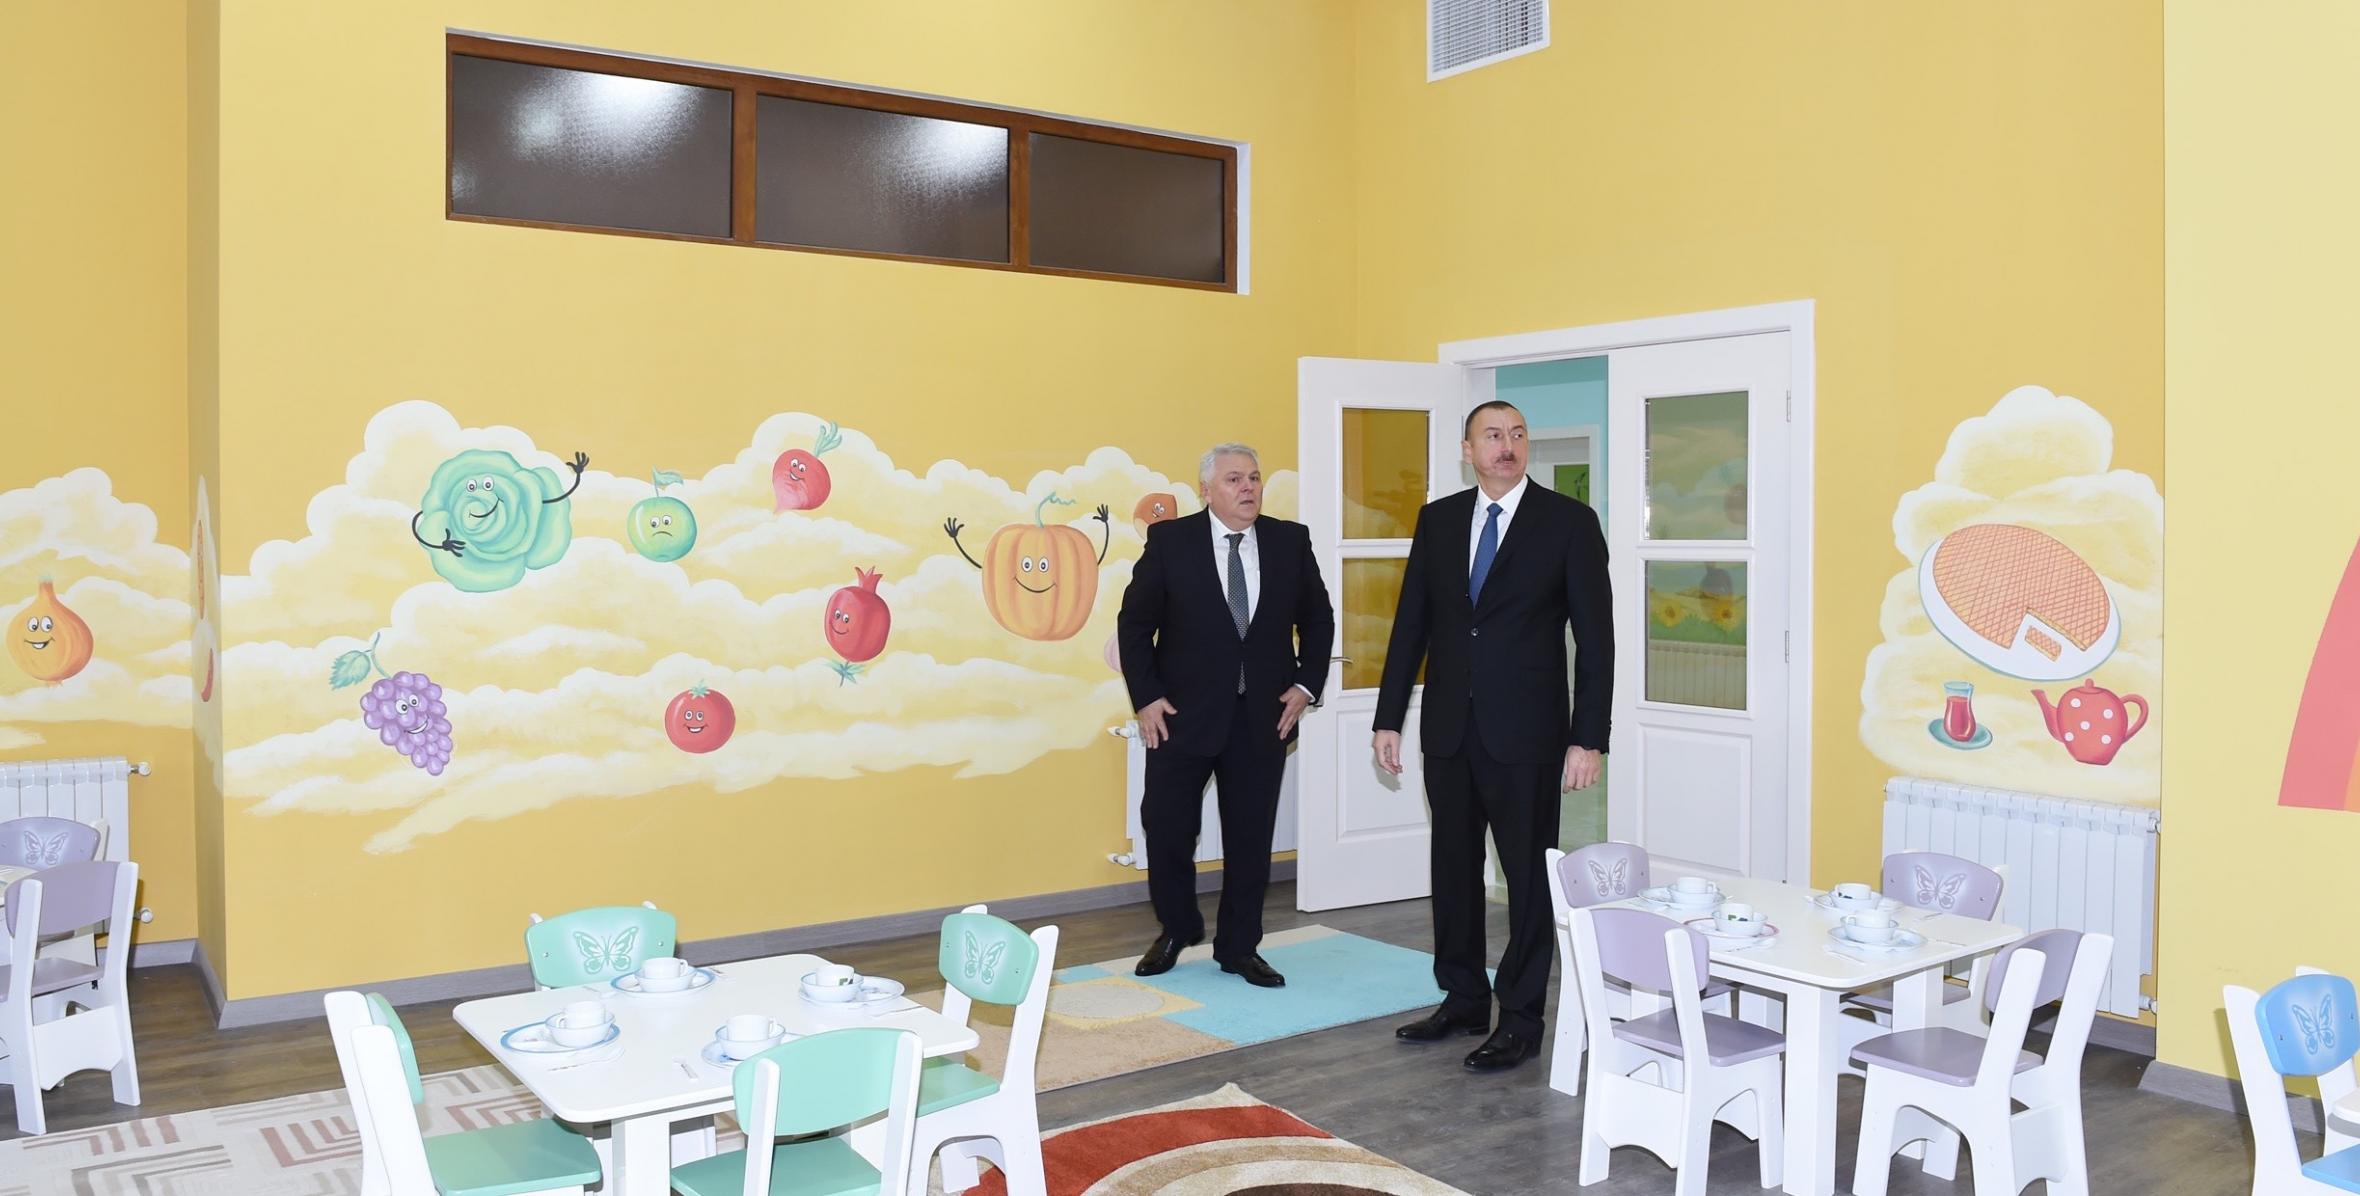 Ilham Aliyev attended the opening of a 160-seat orphanage kindergarten in Shaki